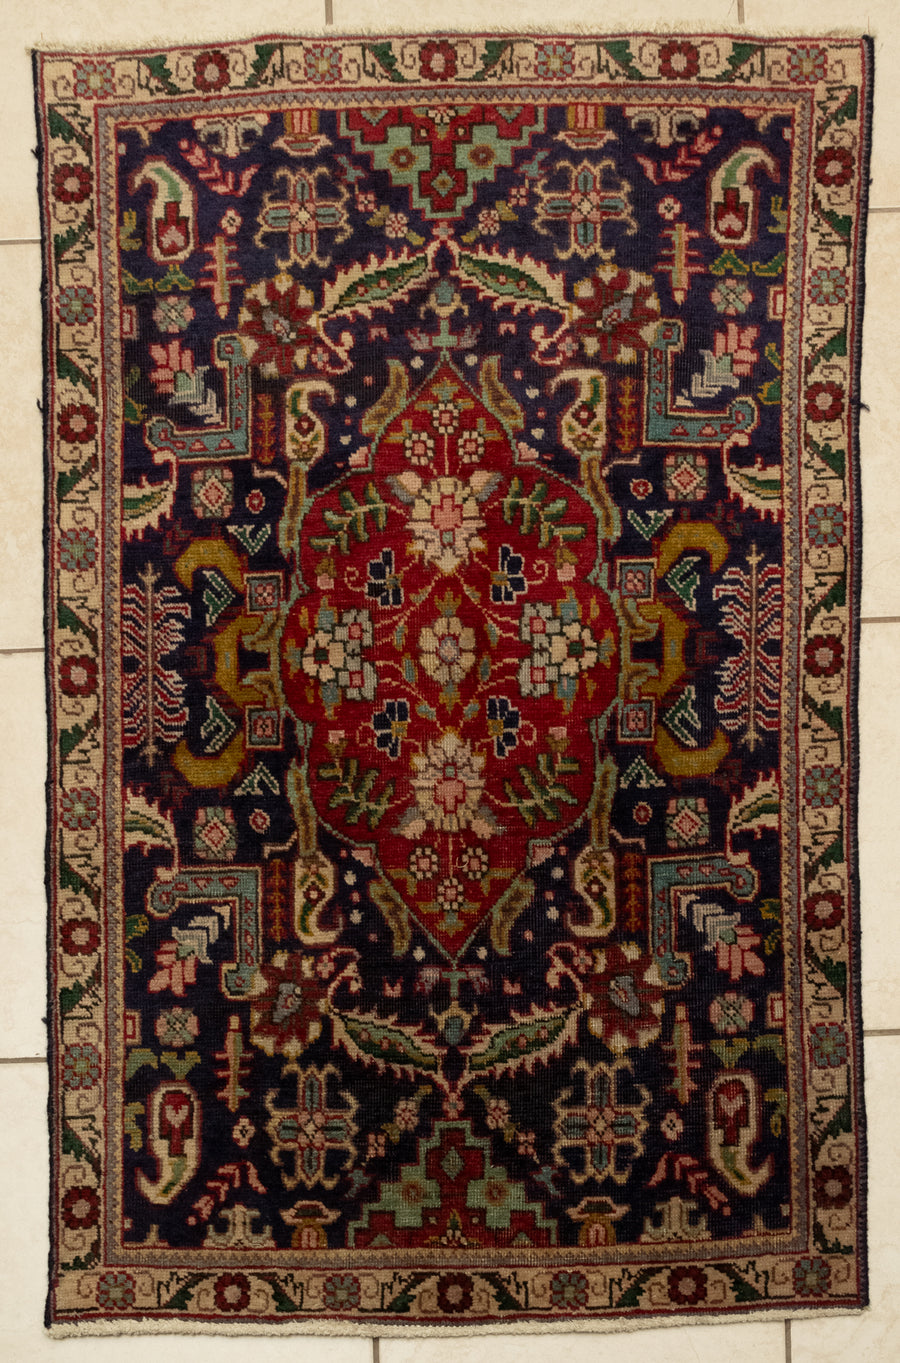 Hand-Knotted Wool Tabriz Rug 4'8" x 3'2"